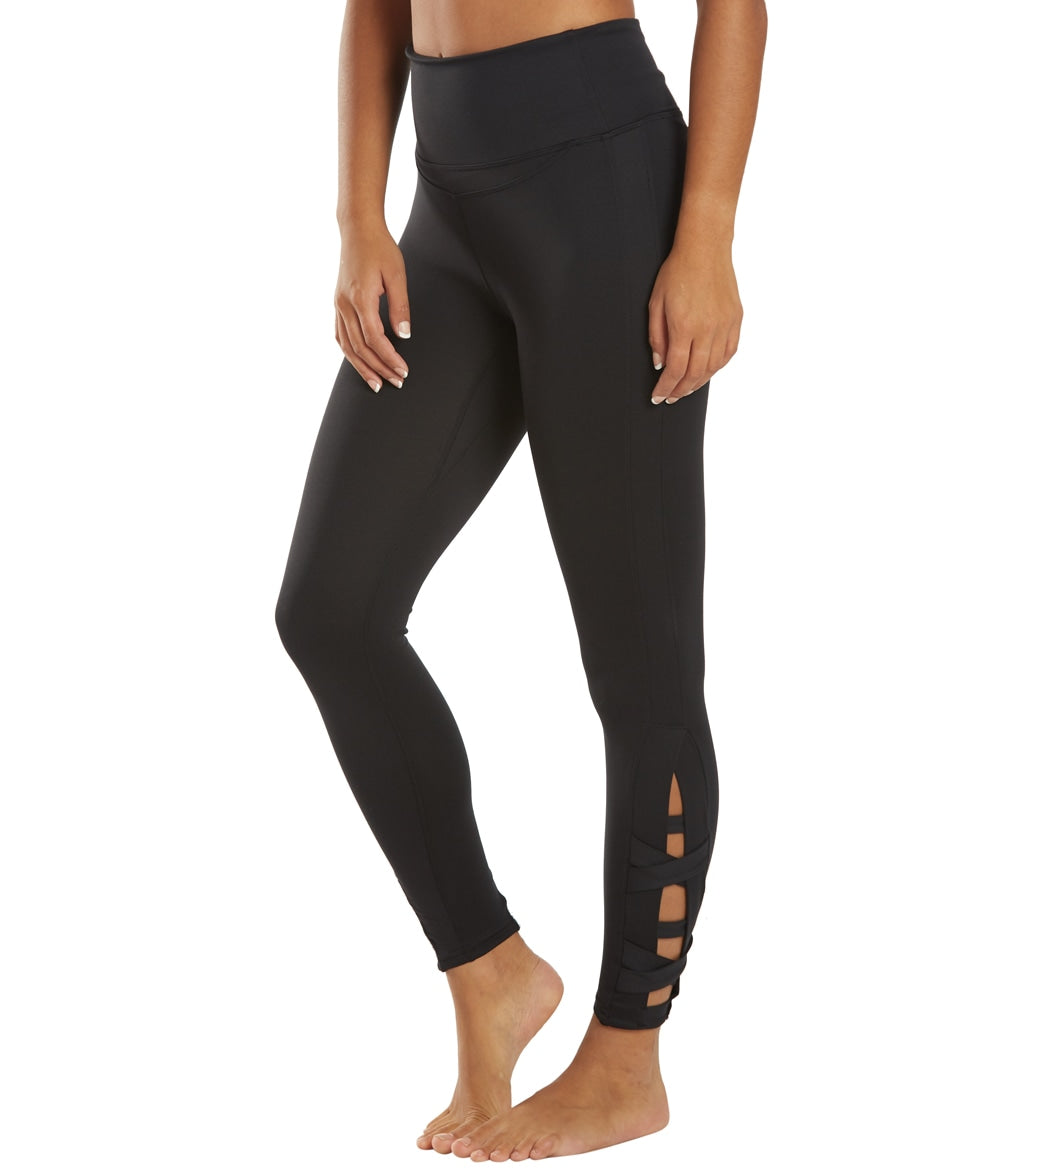 NEW Free People Movement Don't Be Square Crop Leggings XL $78